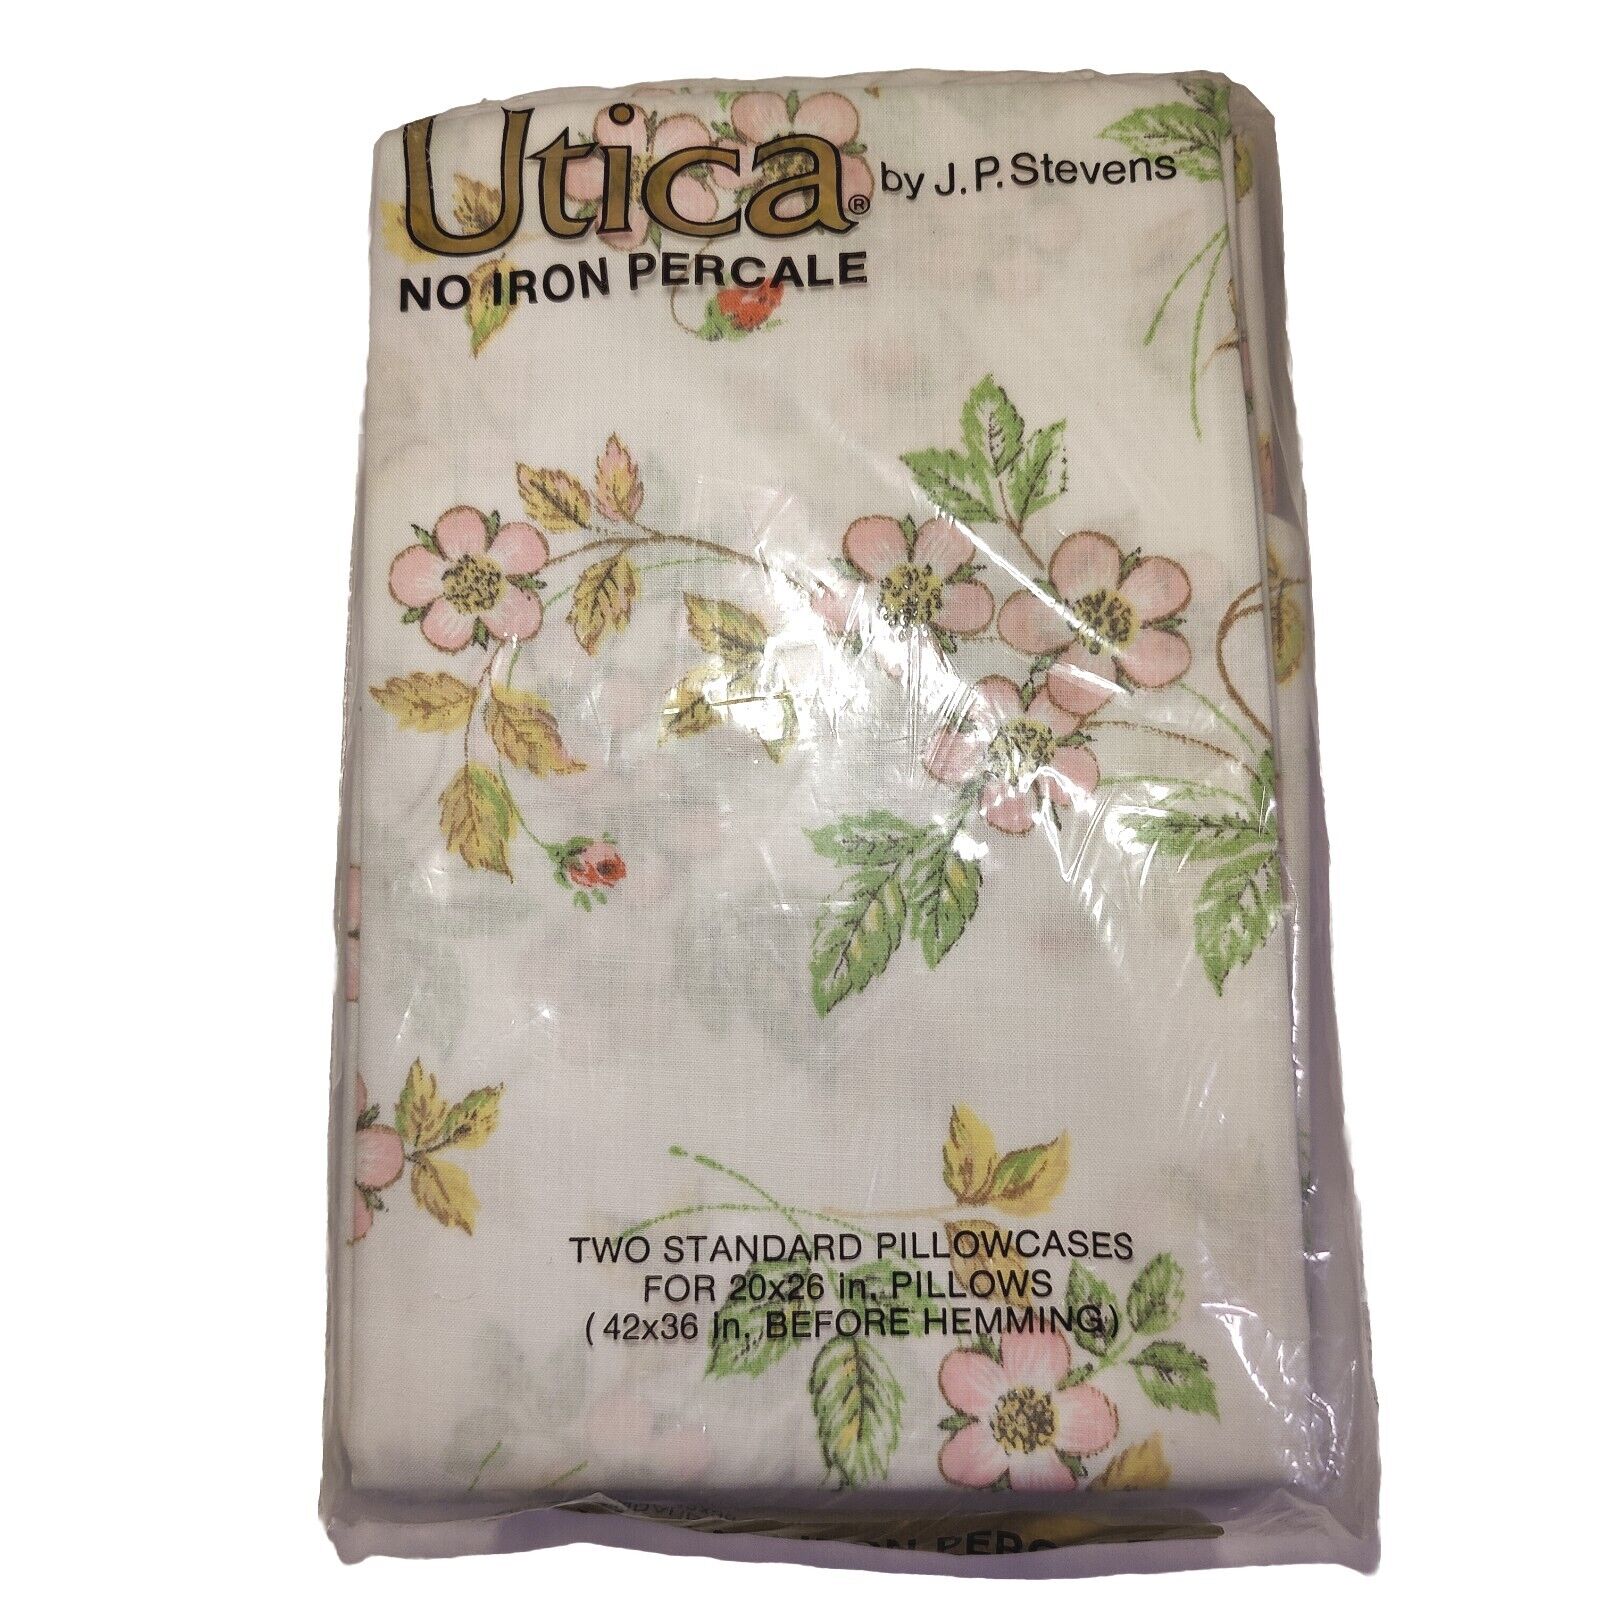 VTG Utica Percale Standard Pillowcases Pack NOS 2 Floral Cotton Blend Pink 